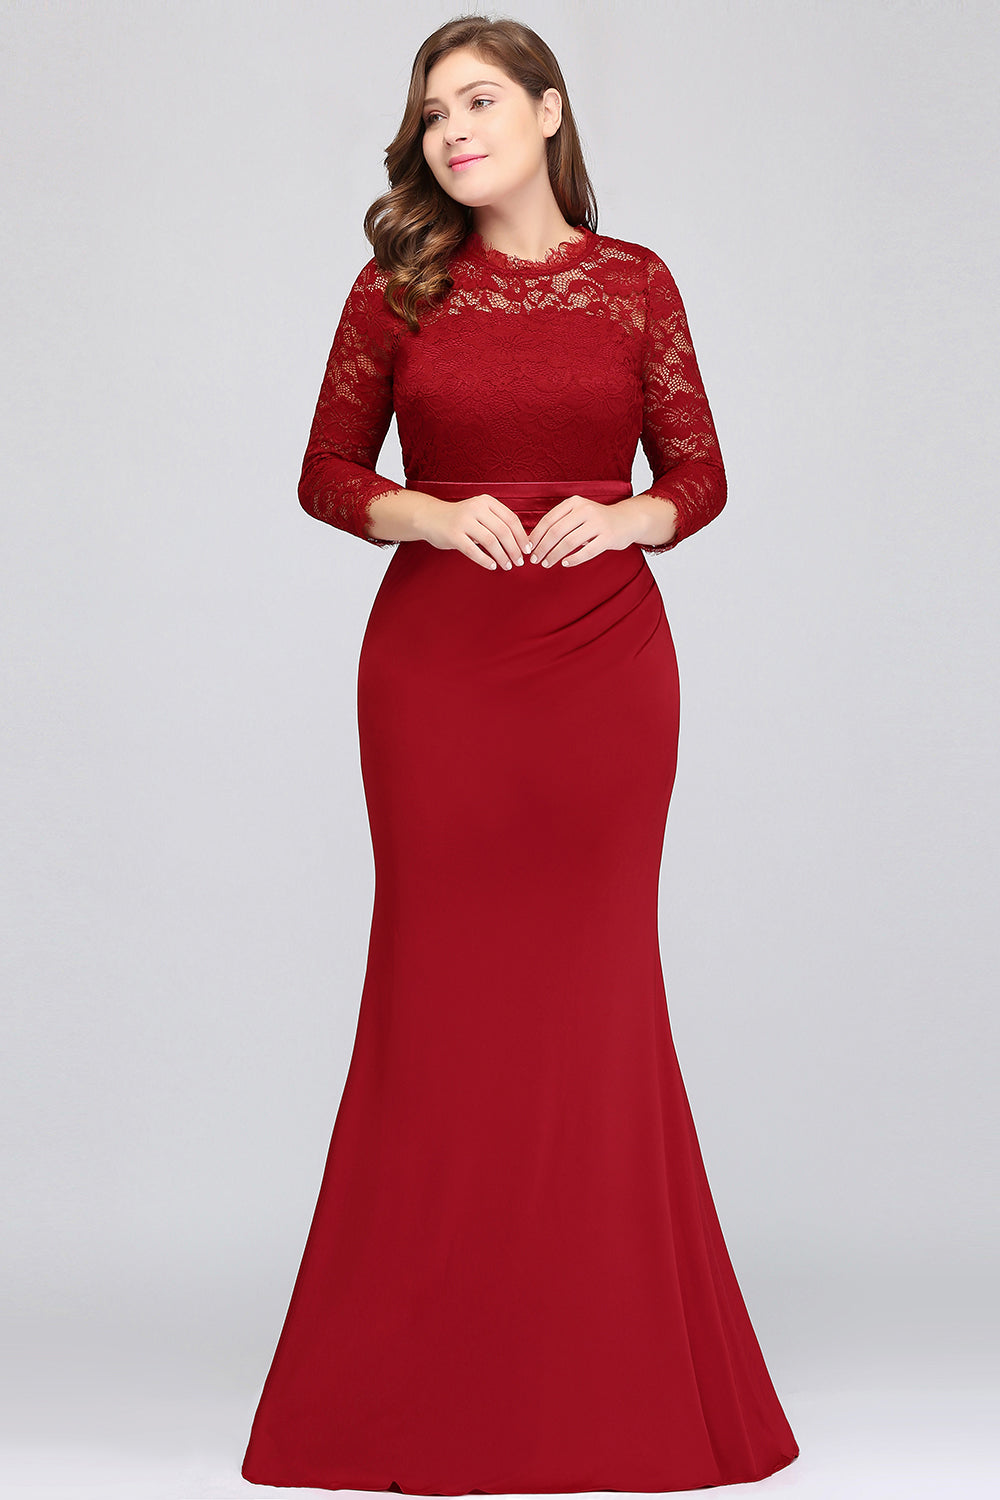 Charming Plus Sizes Long Lace Mermaid Bridesmaid Dress with Sleeves-BIZTUNNEL